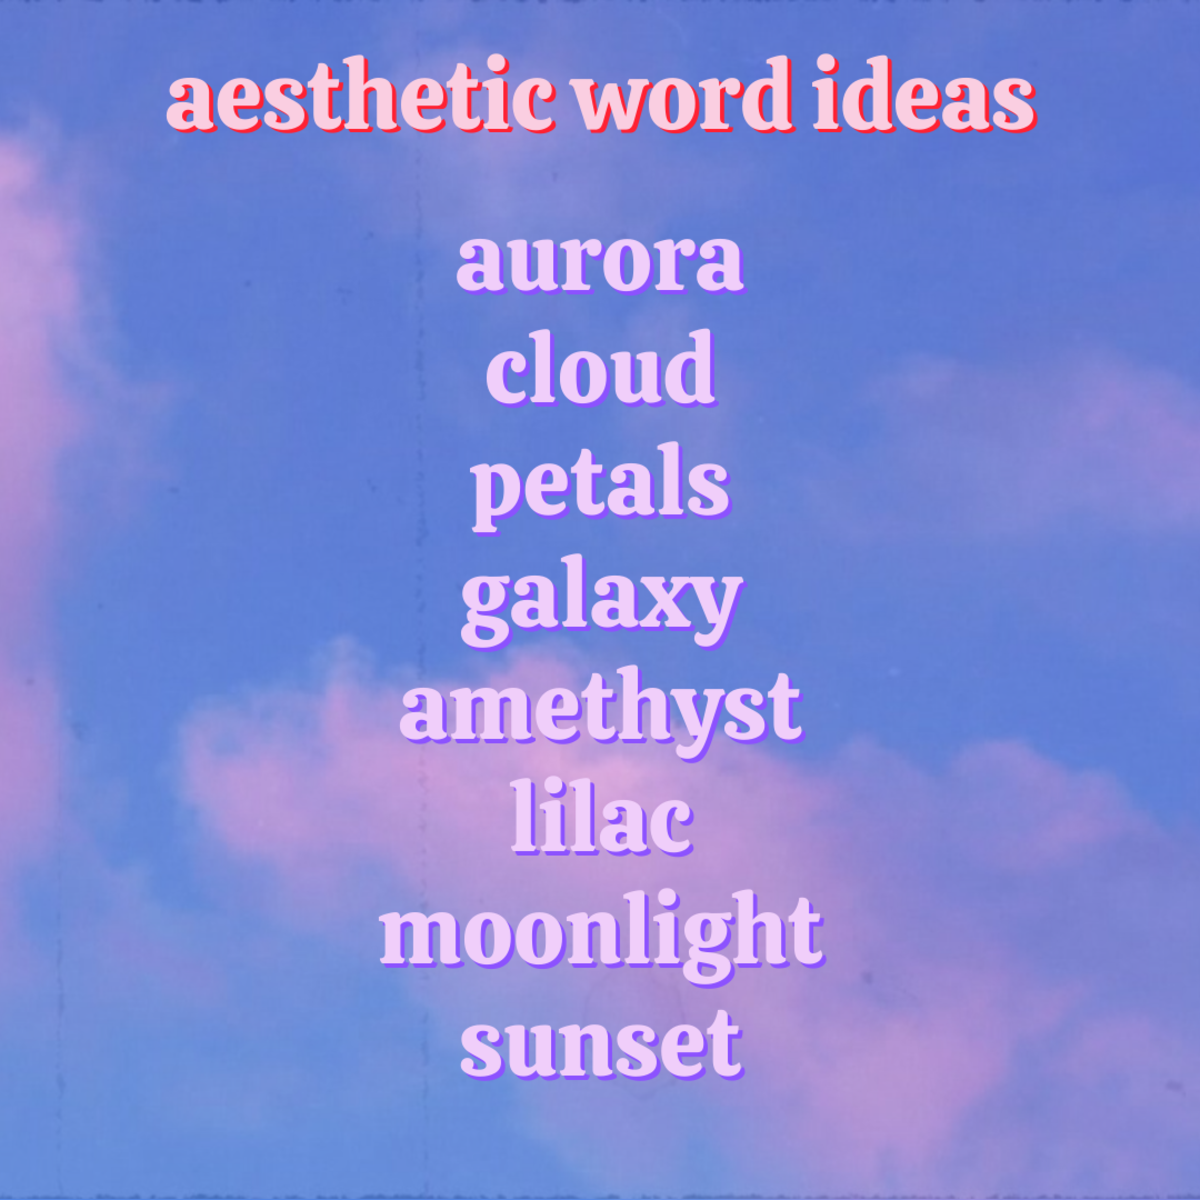 Here are some super aesthetic word ideas to inspire you!